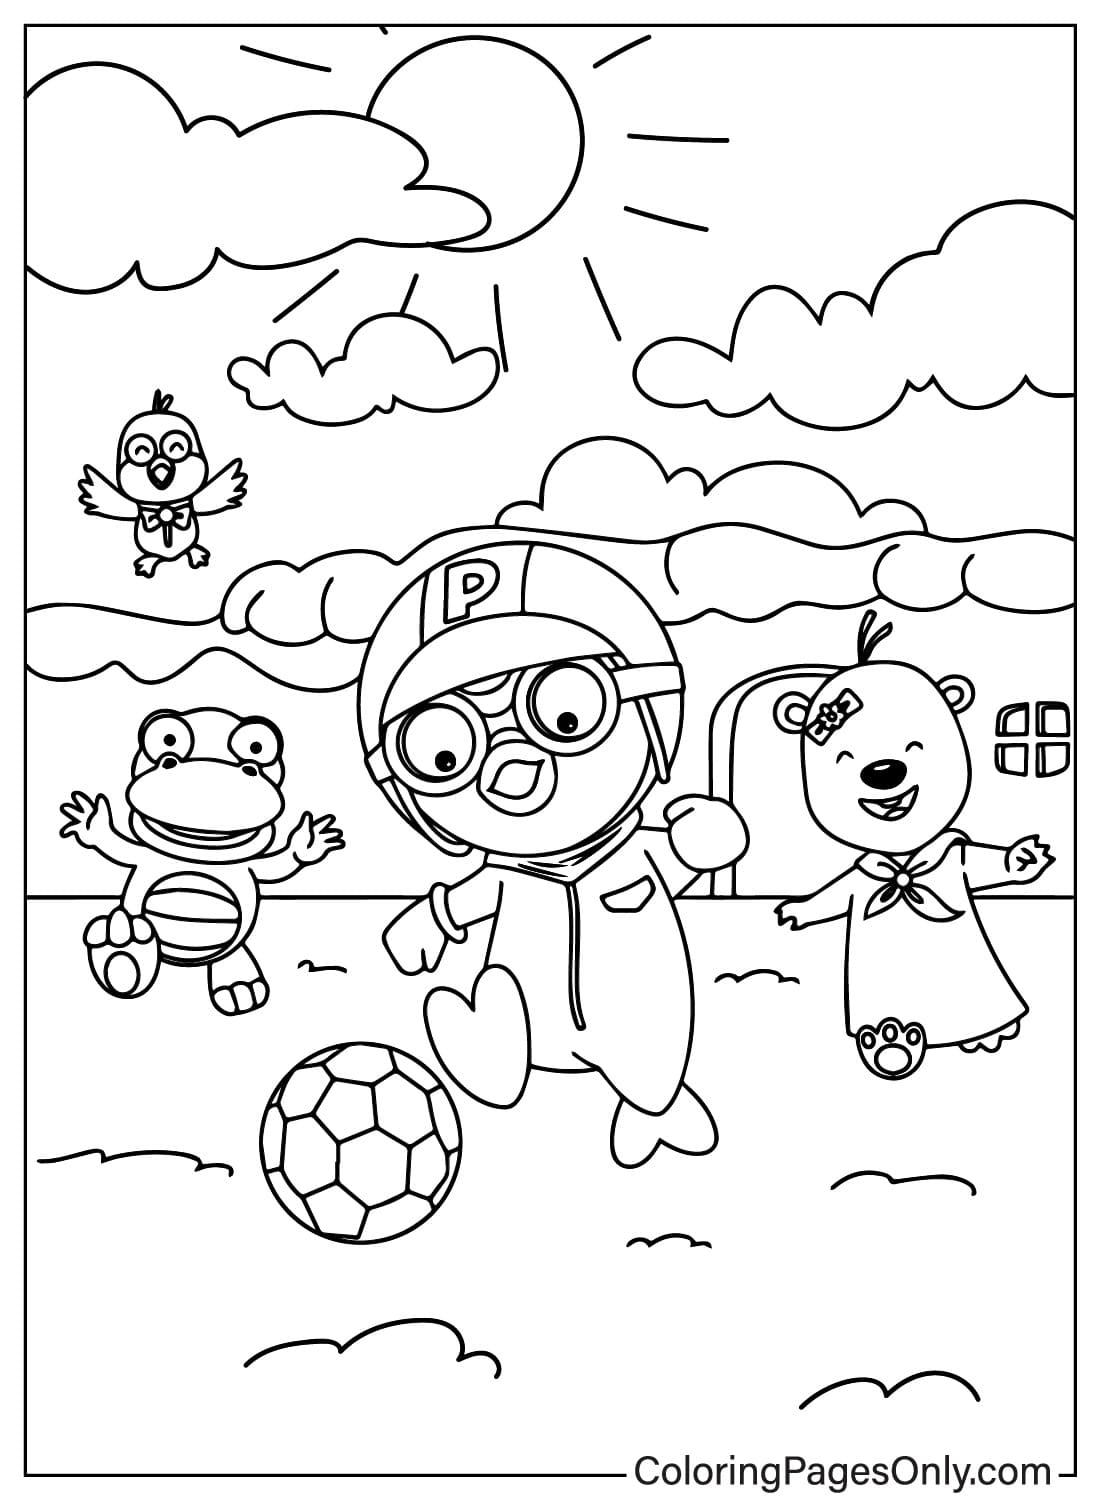 Pororo the Little Penguin Coloring Page from Pororo the Little Penguin